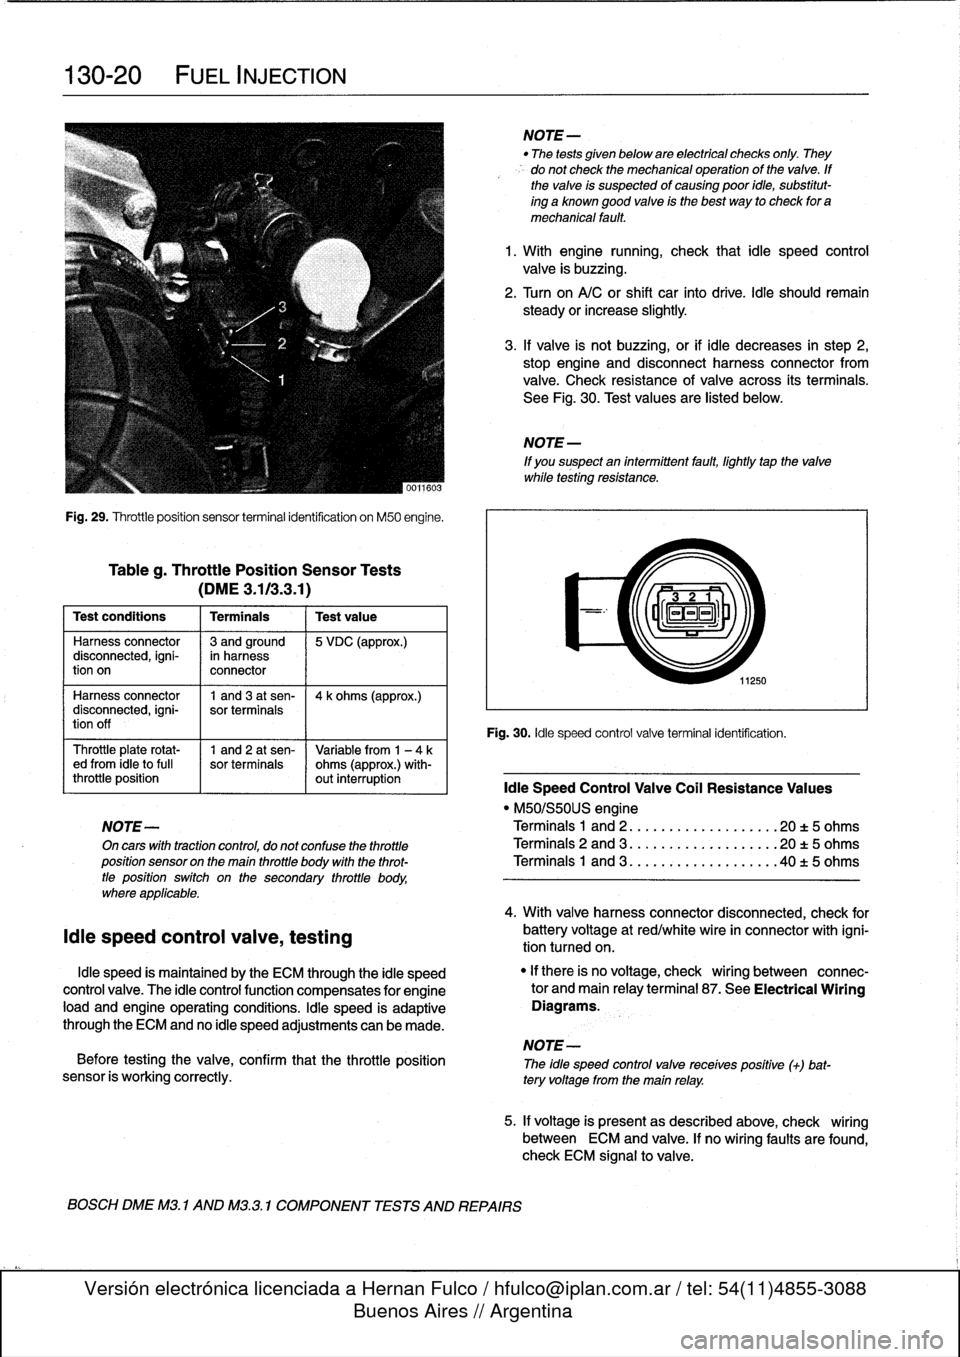 BMW 328i 1994 E36 Workshop Manual 
130-20

	

FUEL
INJECTION

Fig
.
29
.
Throttleposition
sensor
terminal
identification
on
M50
engine
.

Tableg
.
Throttle
Position
Sensor
Tests

(DME3
.113
.3
.1)

Test
conditions

	

I
Terminals

	

